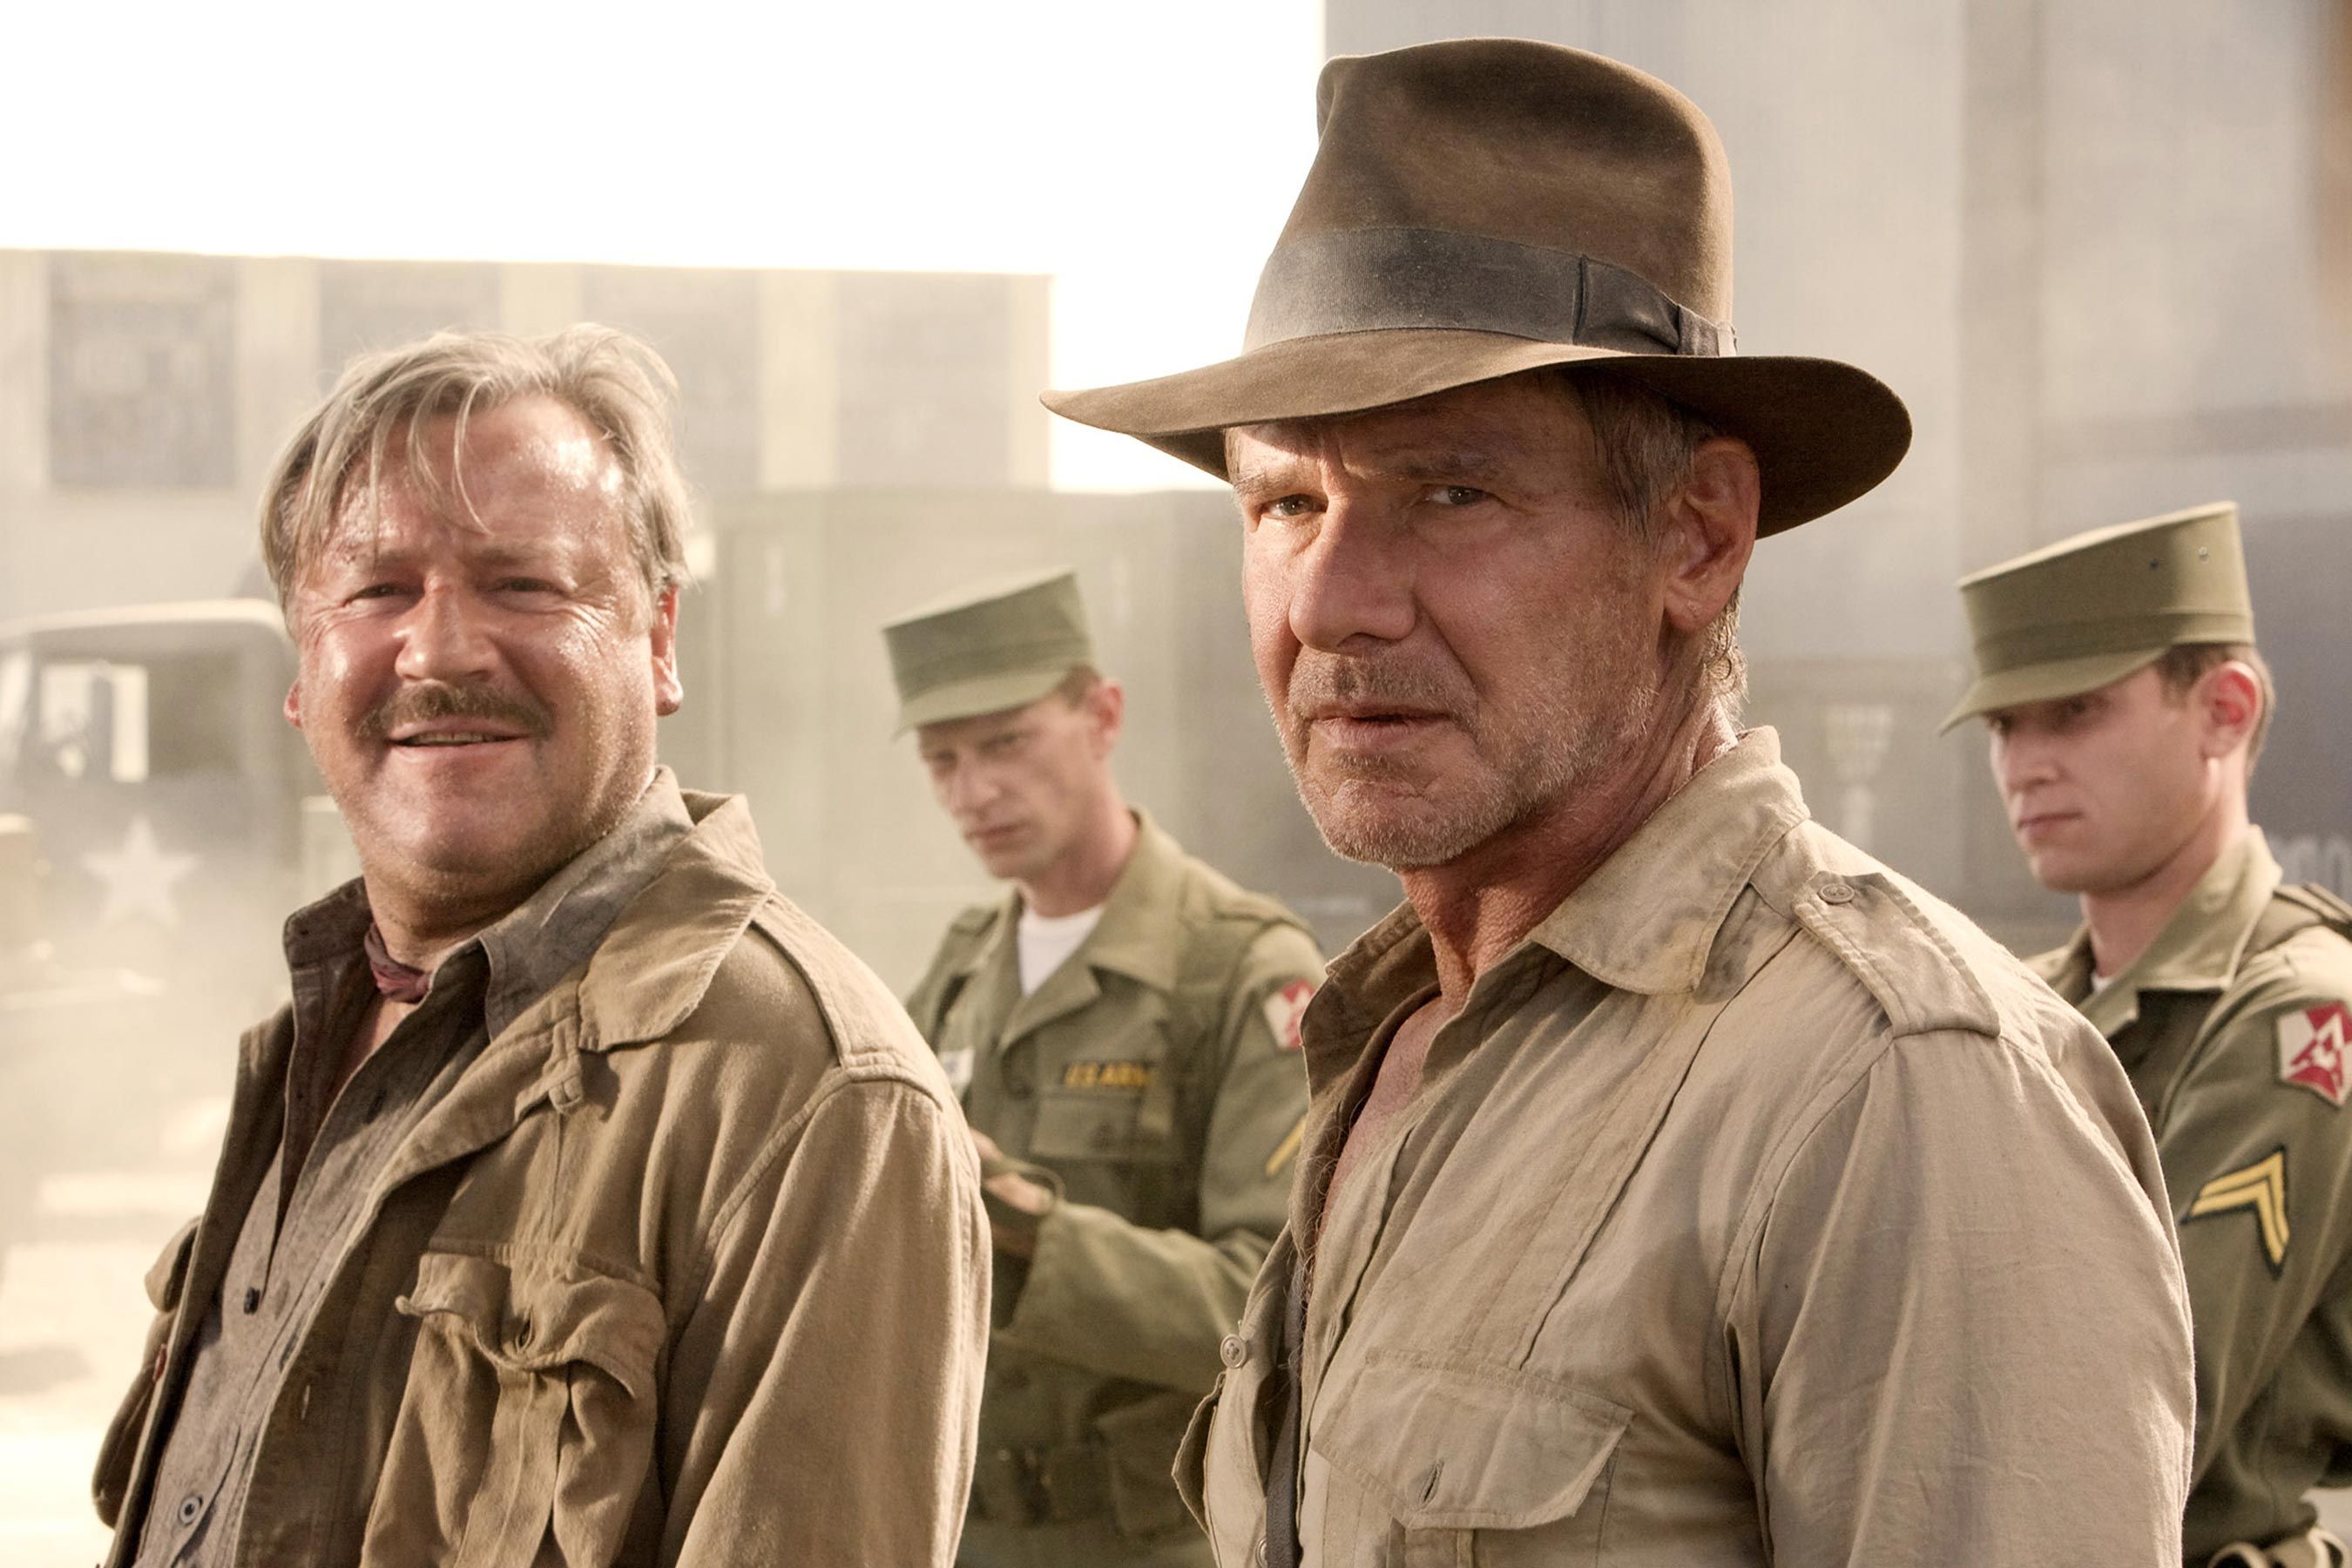 Indiana Jones 5 could be set for another delay